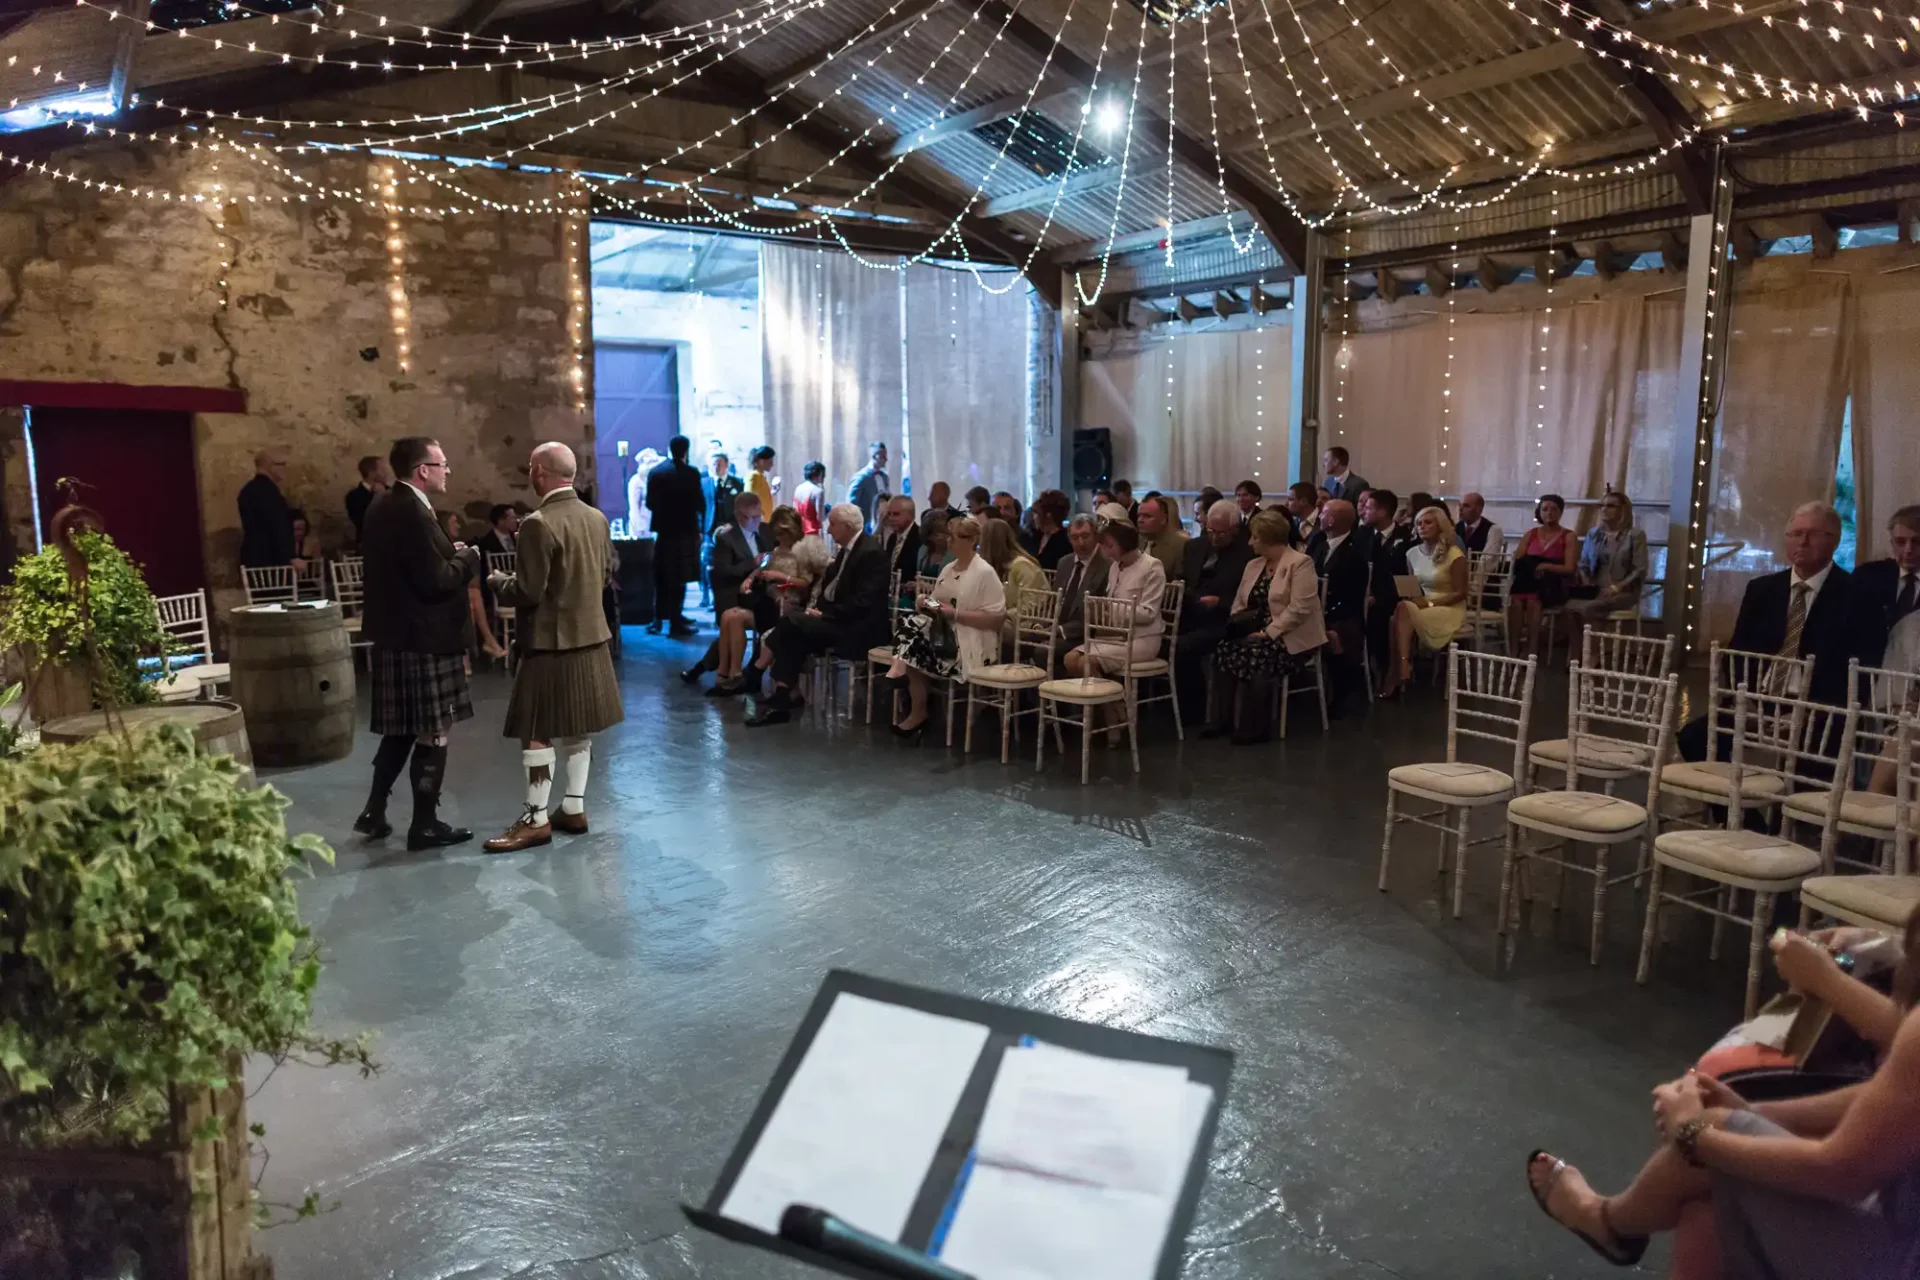 Guests in a rustic event space with string lights, listening to a speaker in traditional scottish attire.